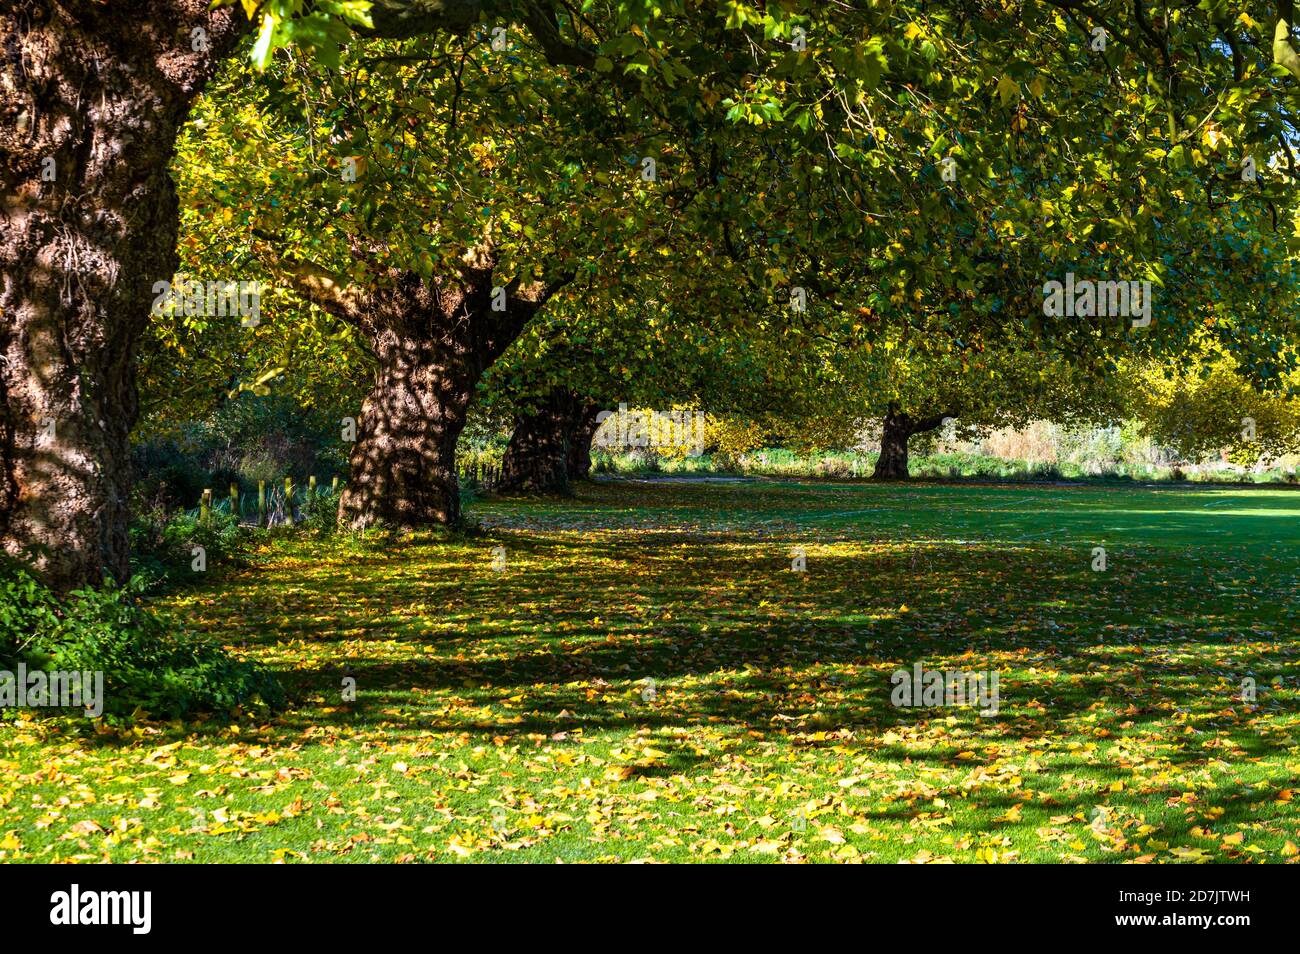 Fallen autumn leaves lie on the grass beneath trees along the bank of the River Itchen in WInchester, Hampshire, England. Stock Photo